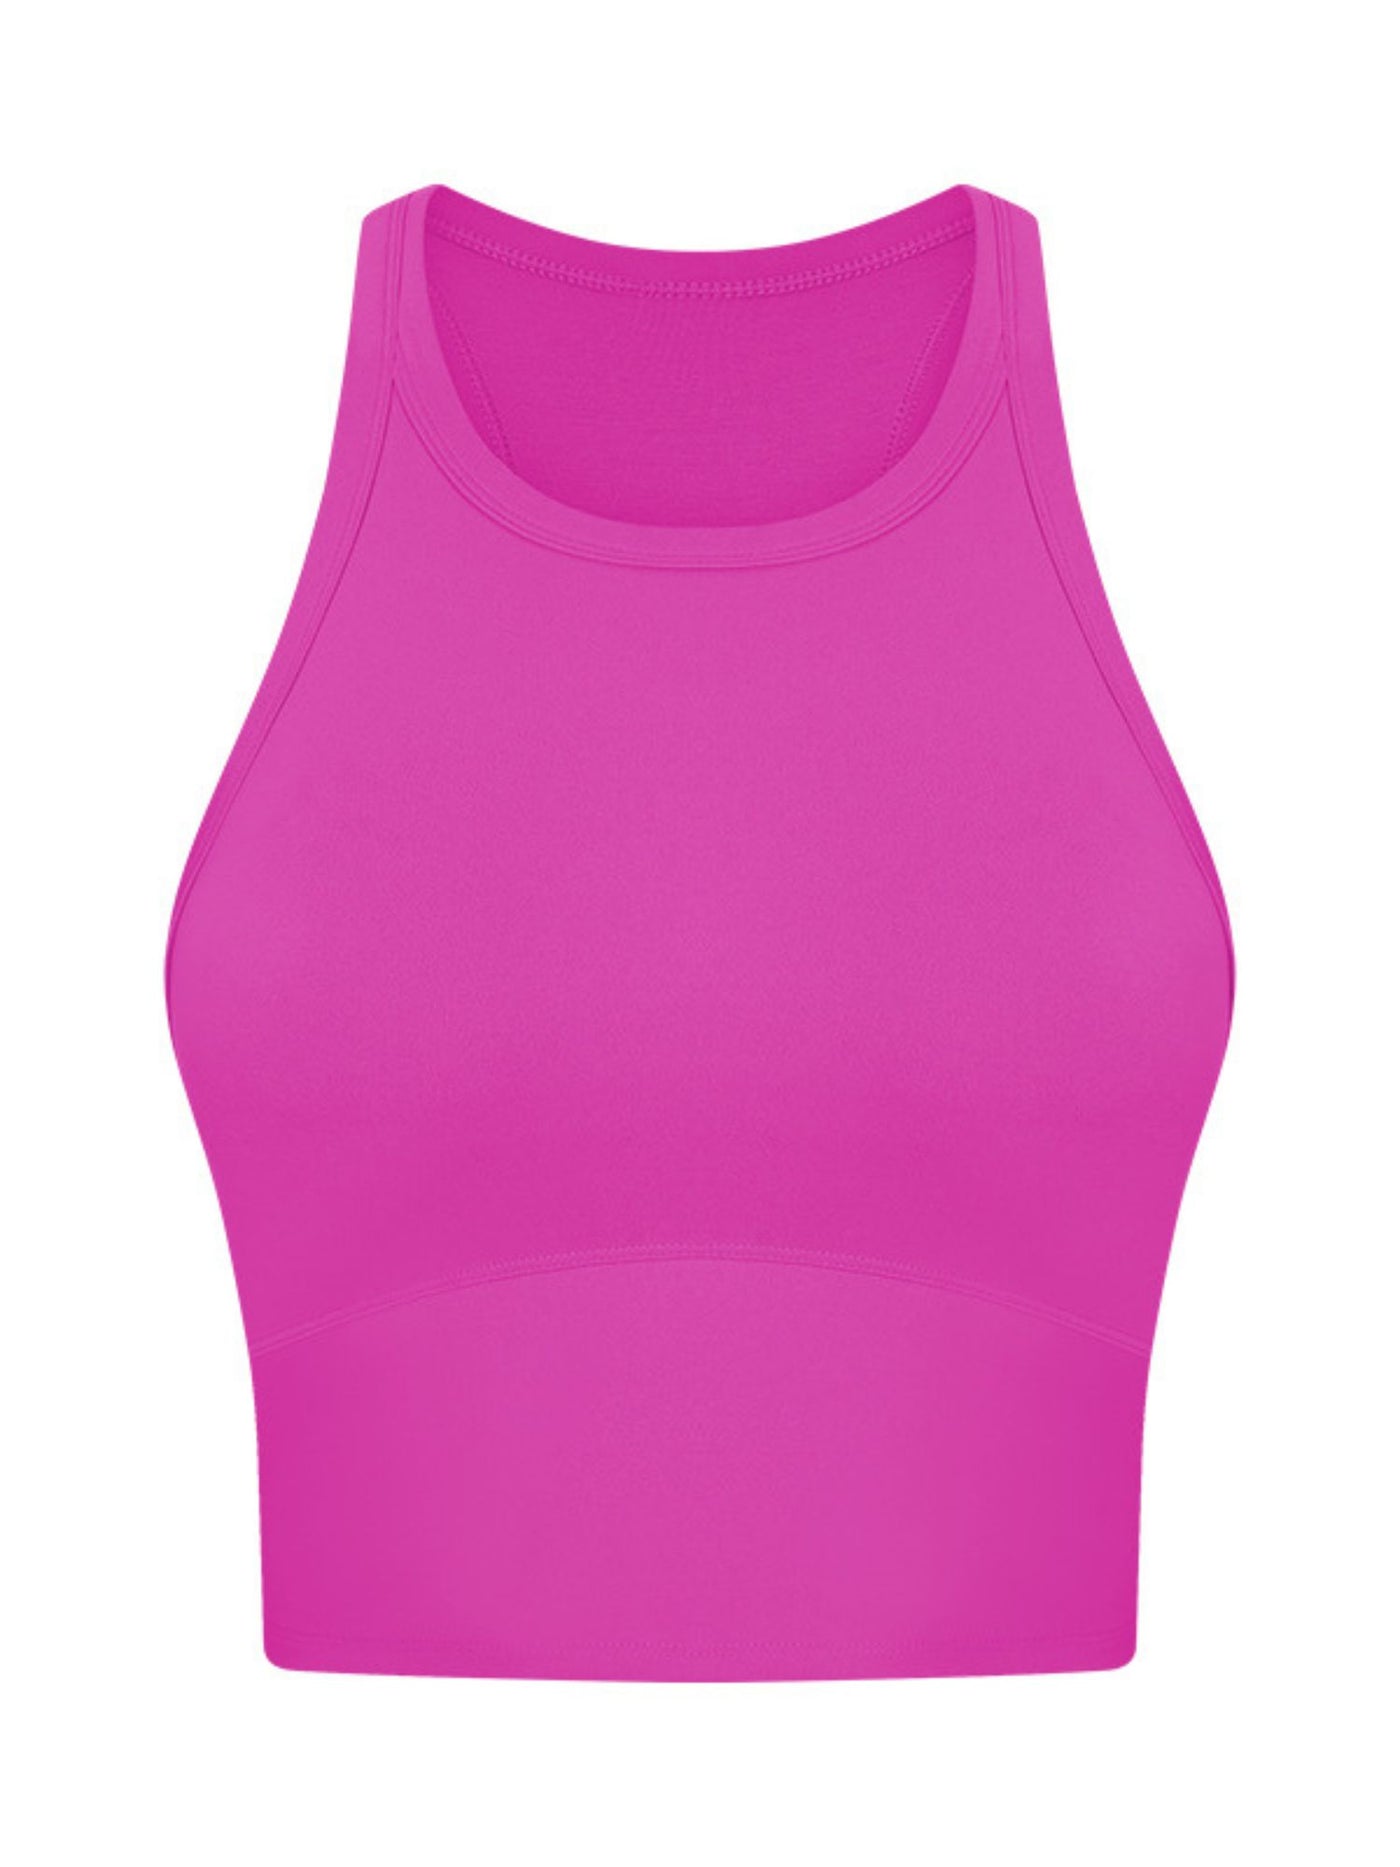 High Neck Longline Bra top with Removable pads in Hot Pink